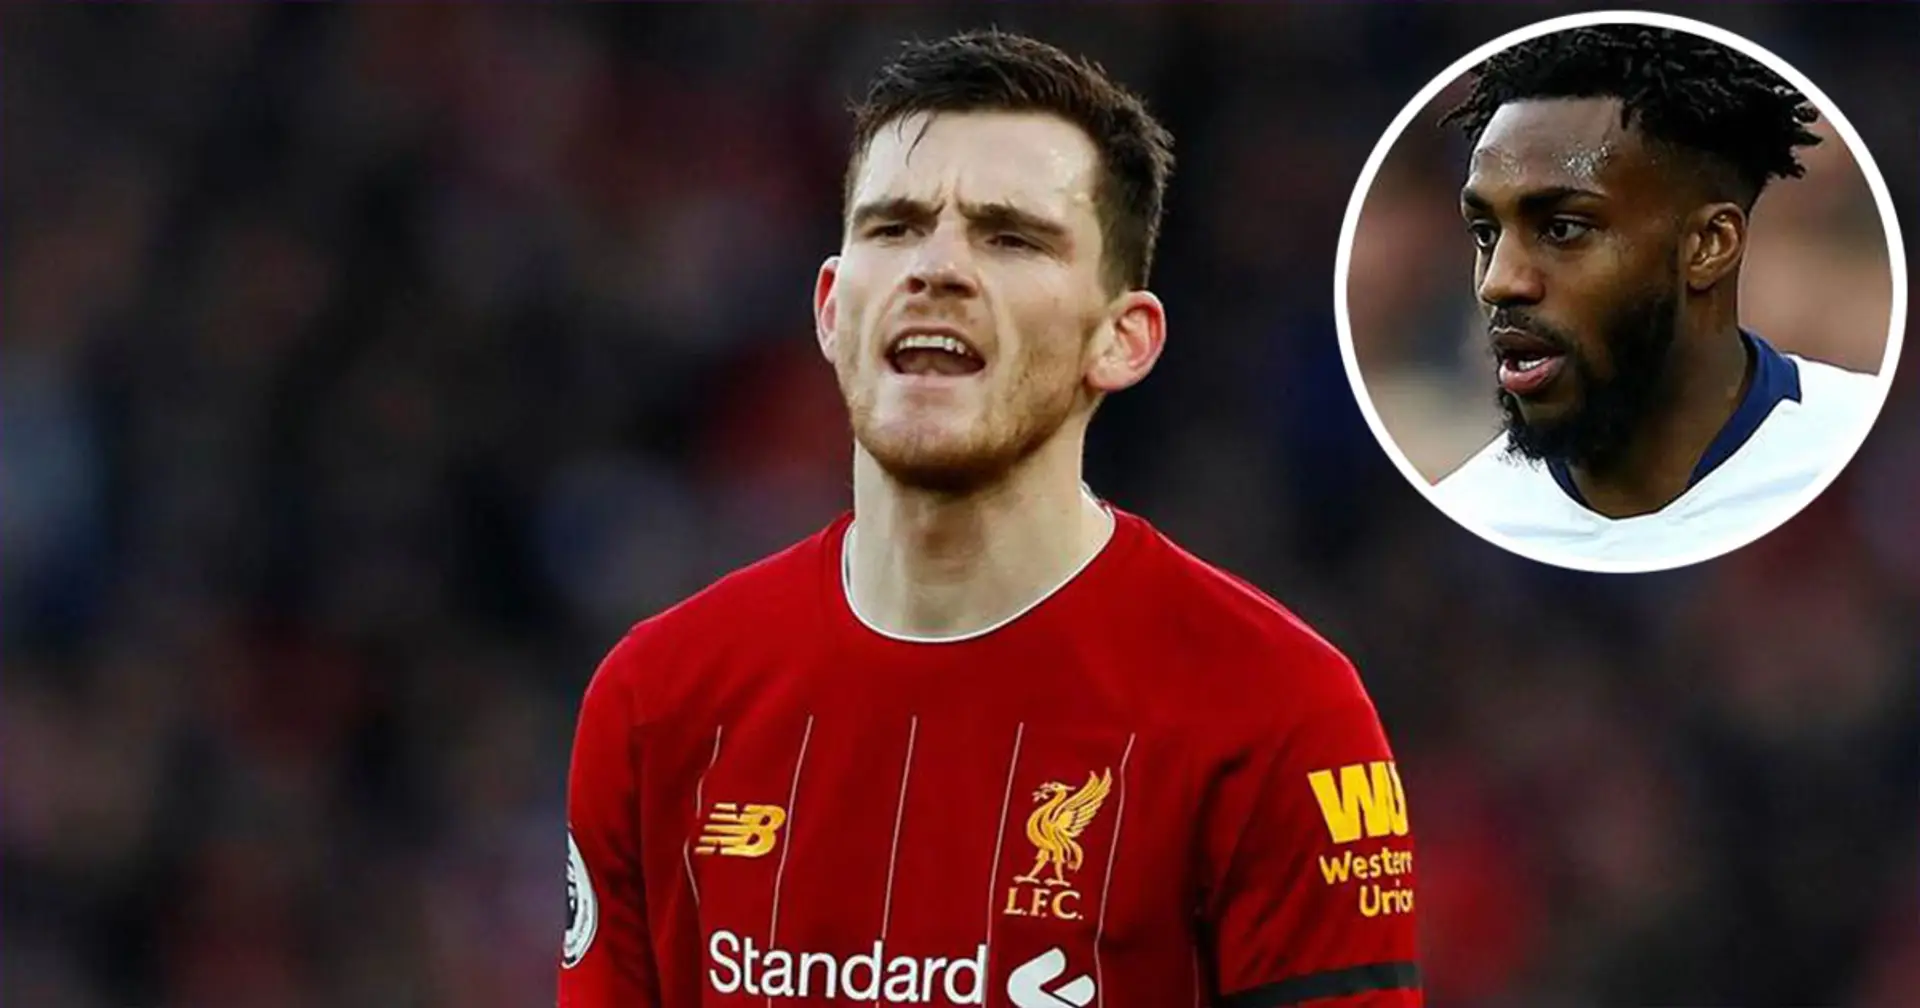 Spurs left-back Danny Rose: 'Andy Robertson looks like a freak of nature, he is the best!'